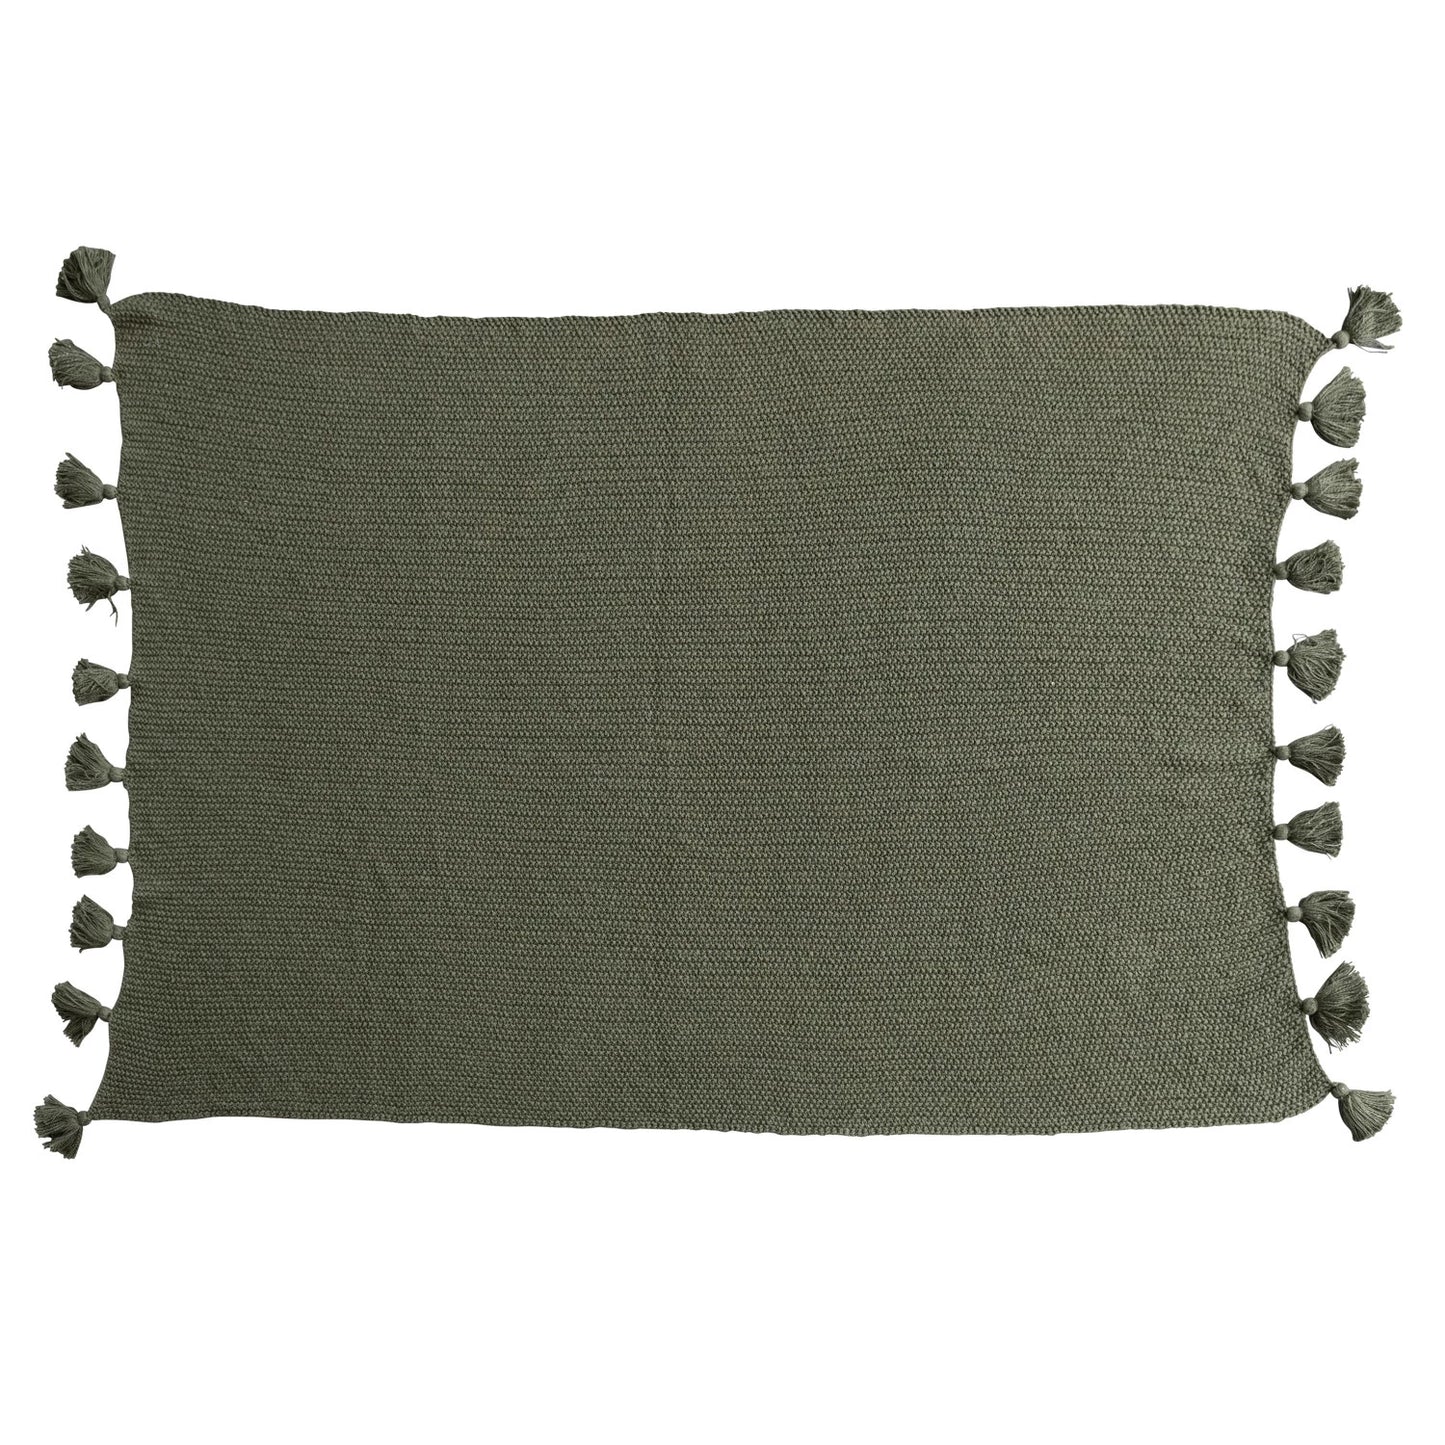 Cotton Knit Throw Blanket - Olive Green